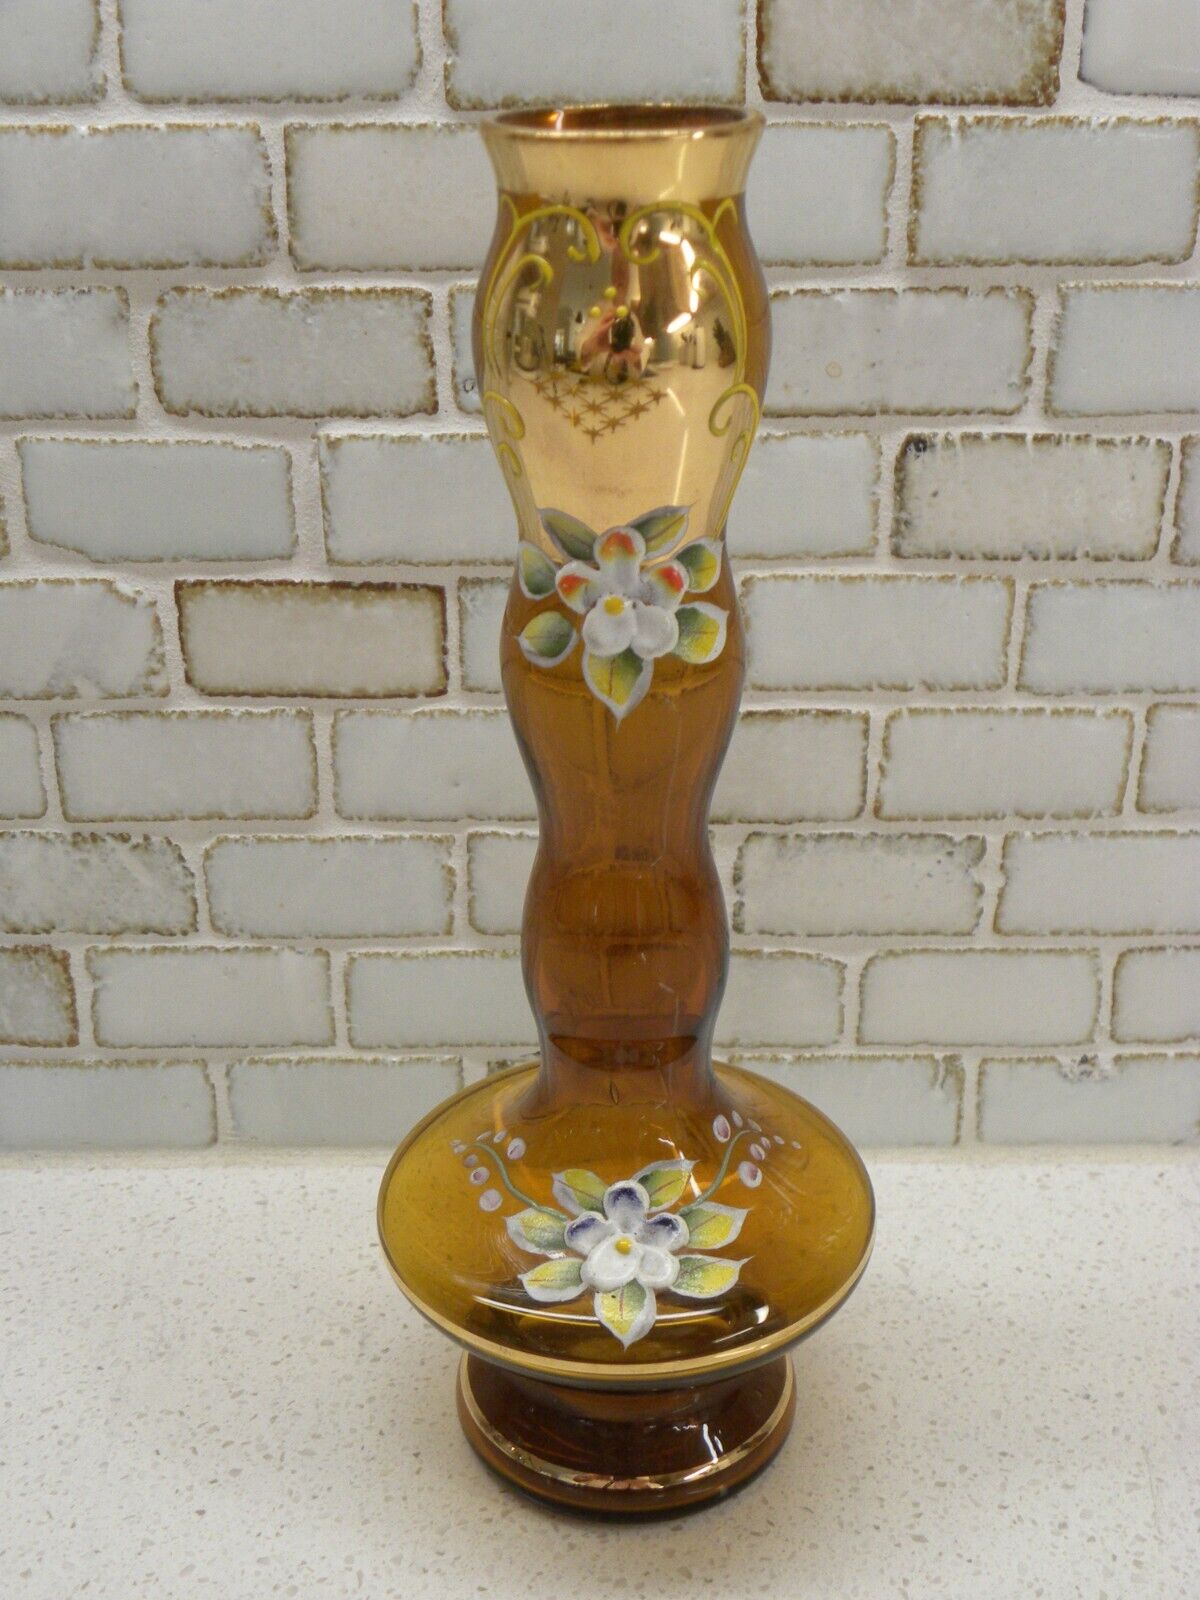 VINTAGE BOHEMIAN BUD VASE Hand Painted Floral Detail Amber Glass CHARMING